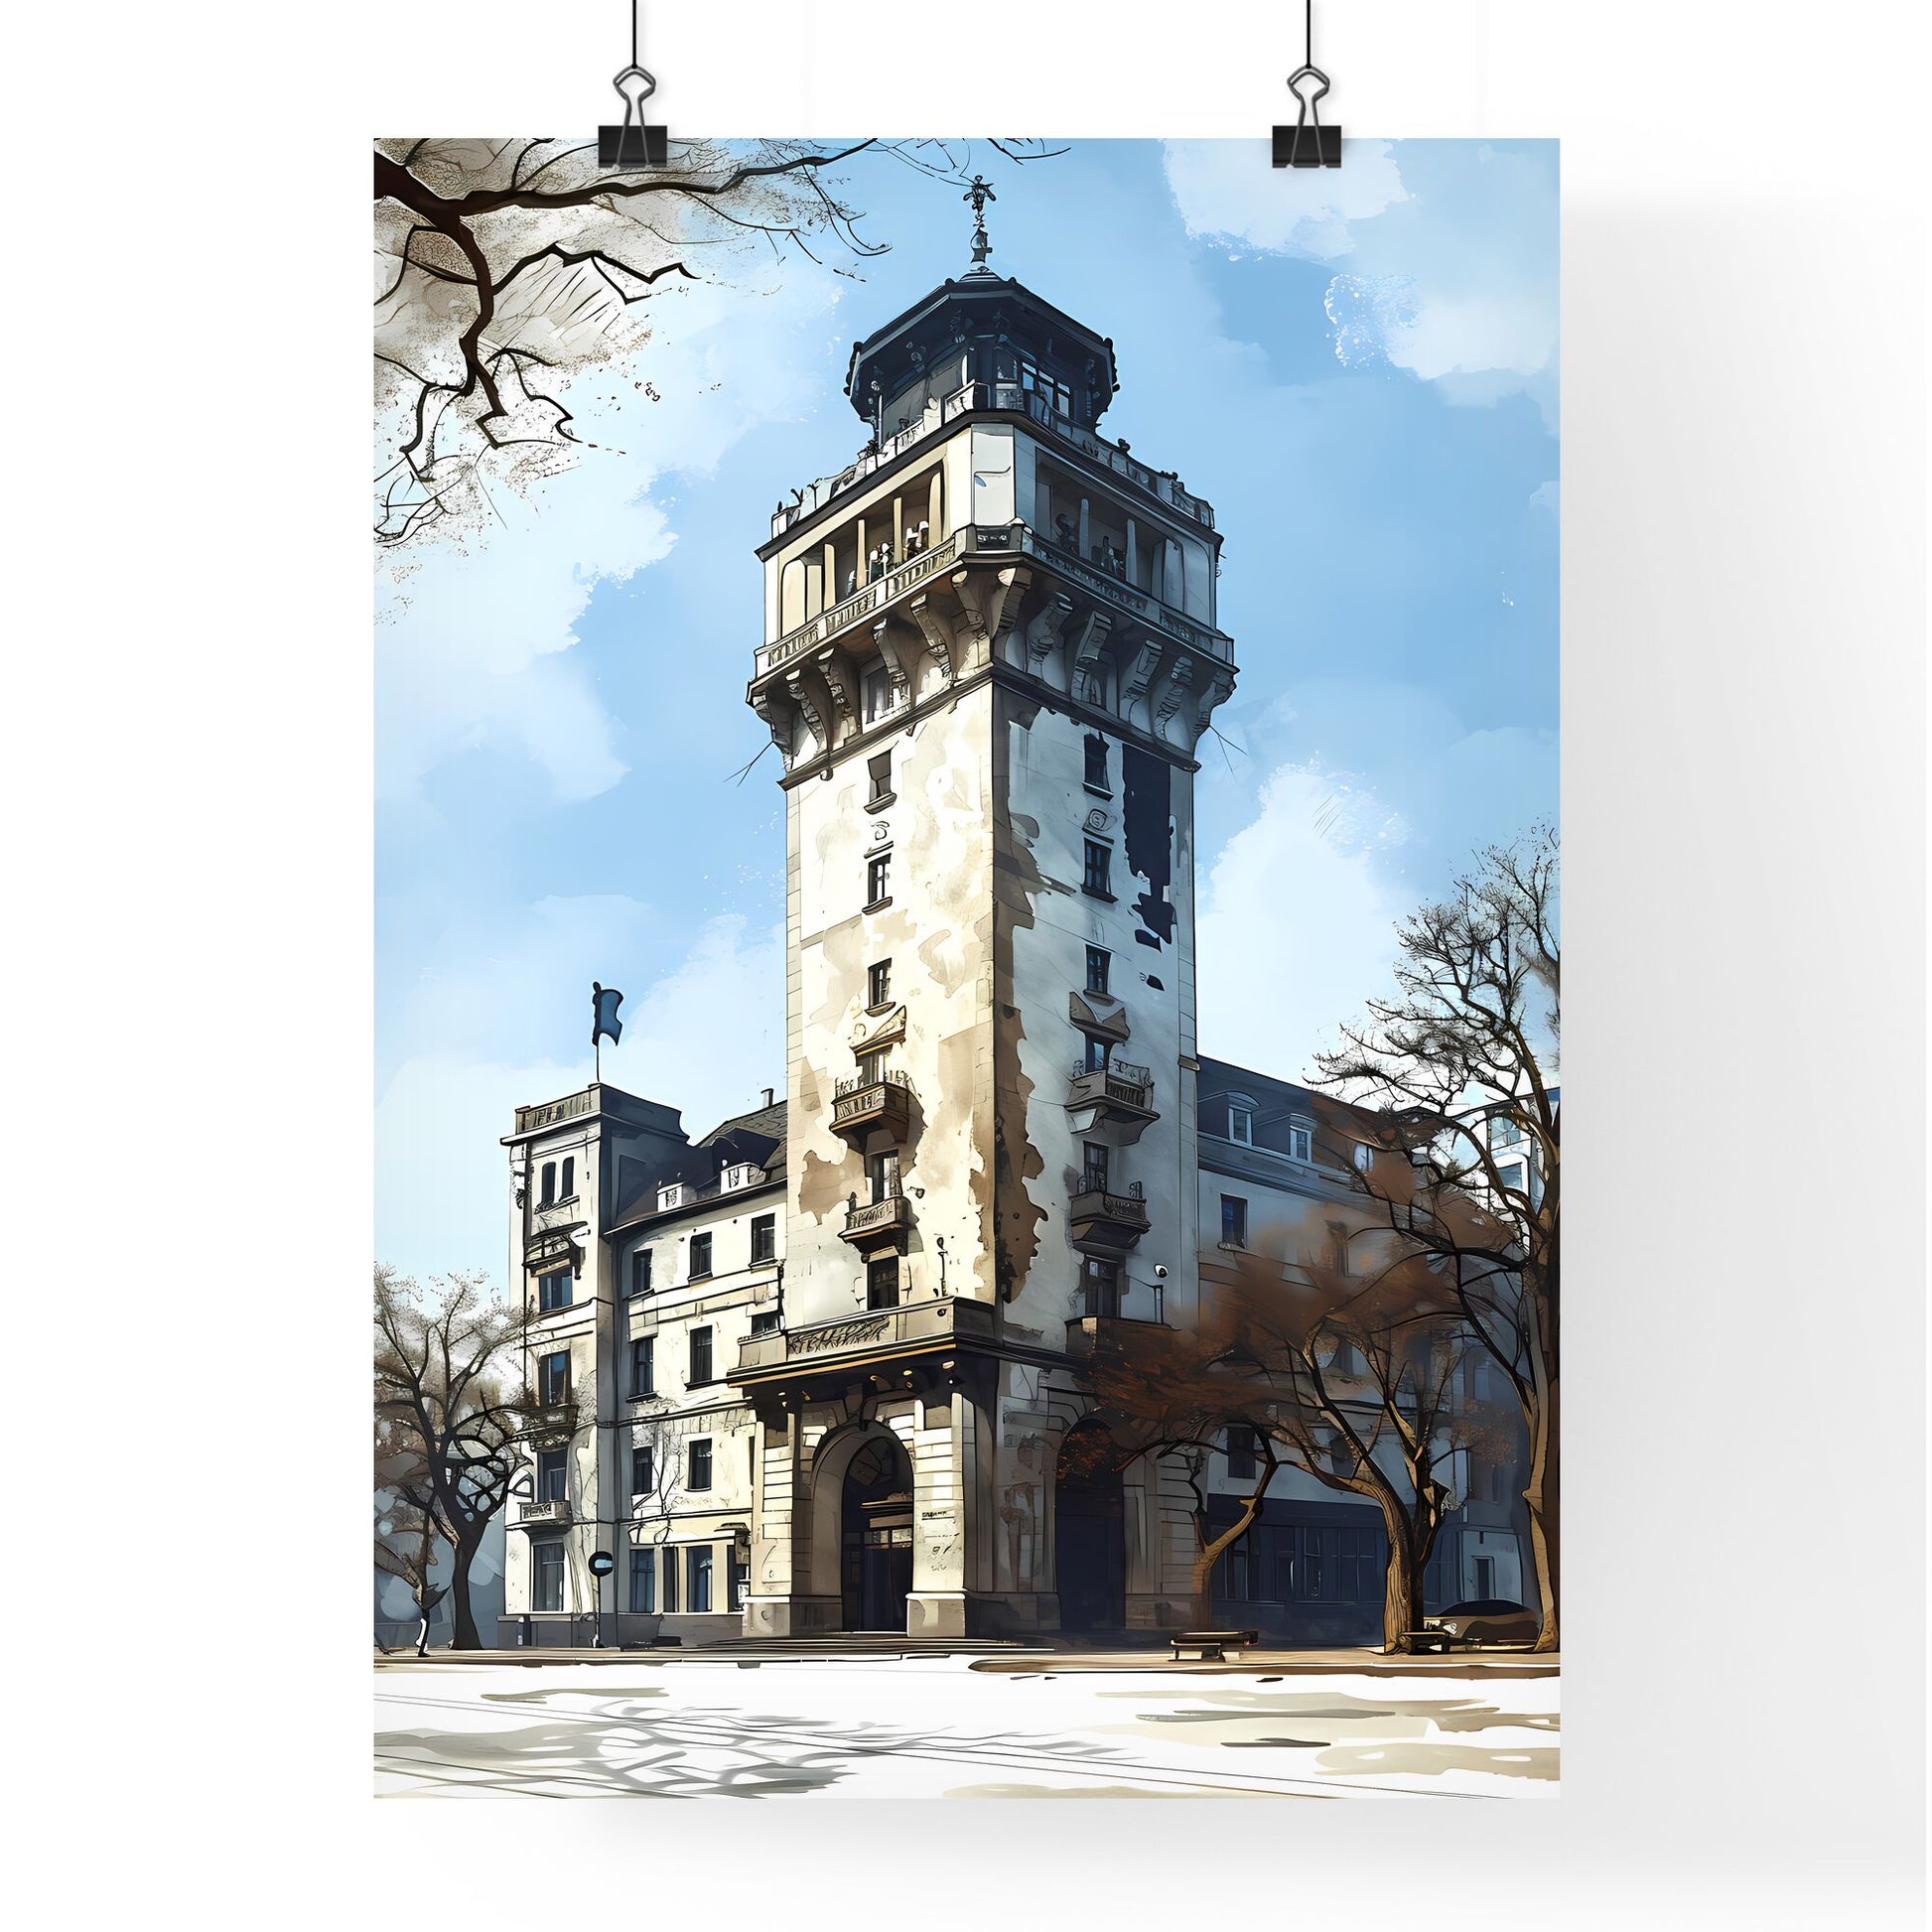 A Poster of Darmstadt Hesse germany Skyline - A Building With A Tower Default Title